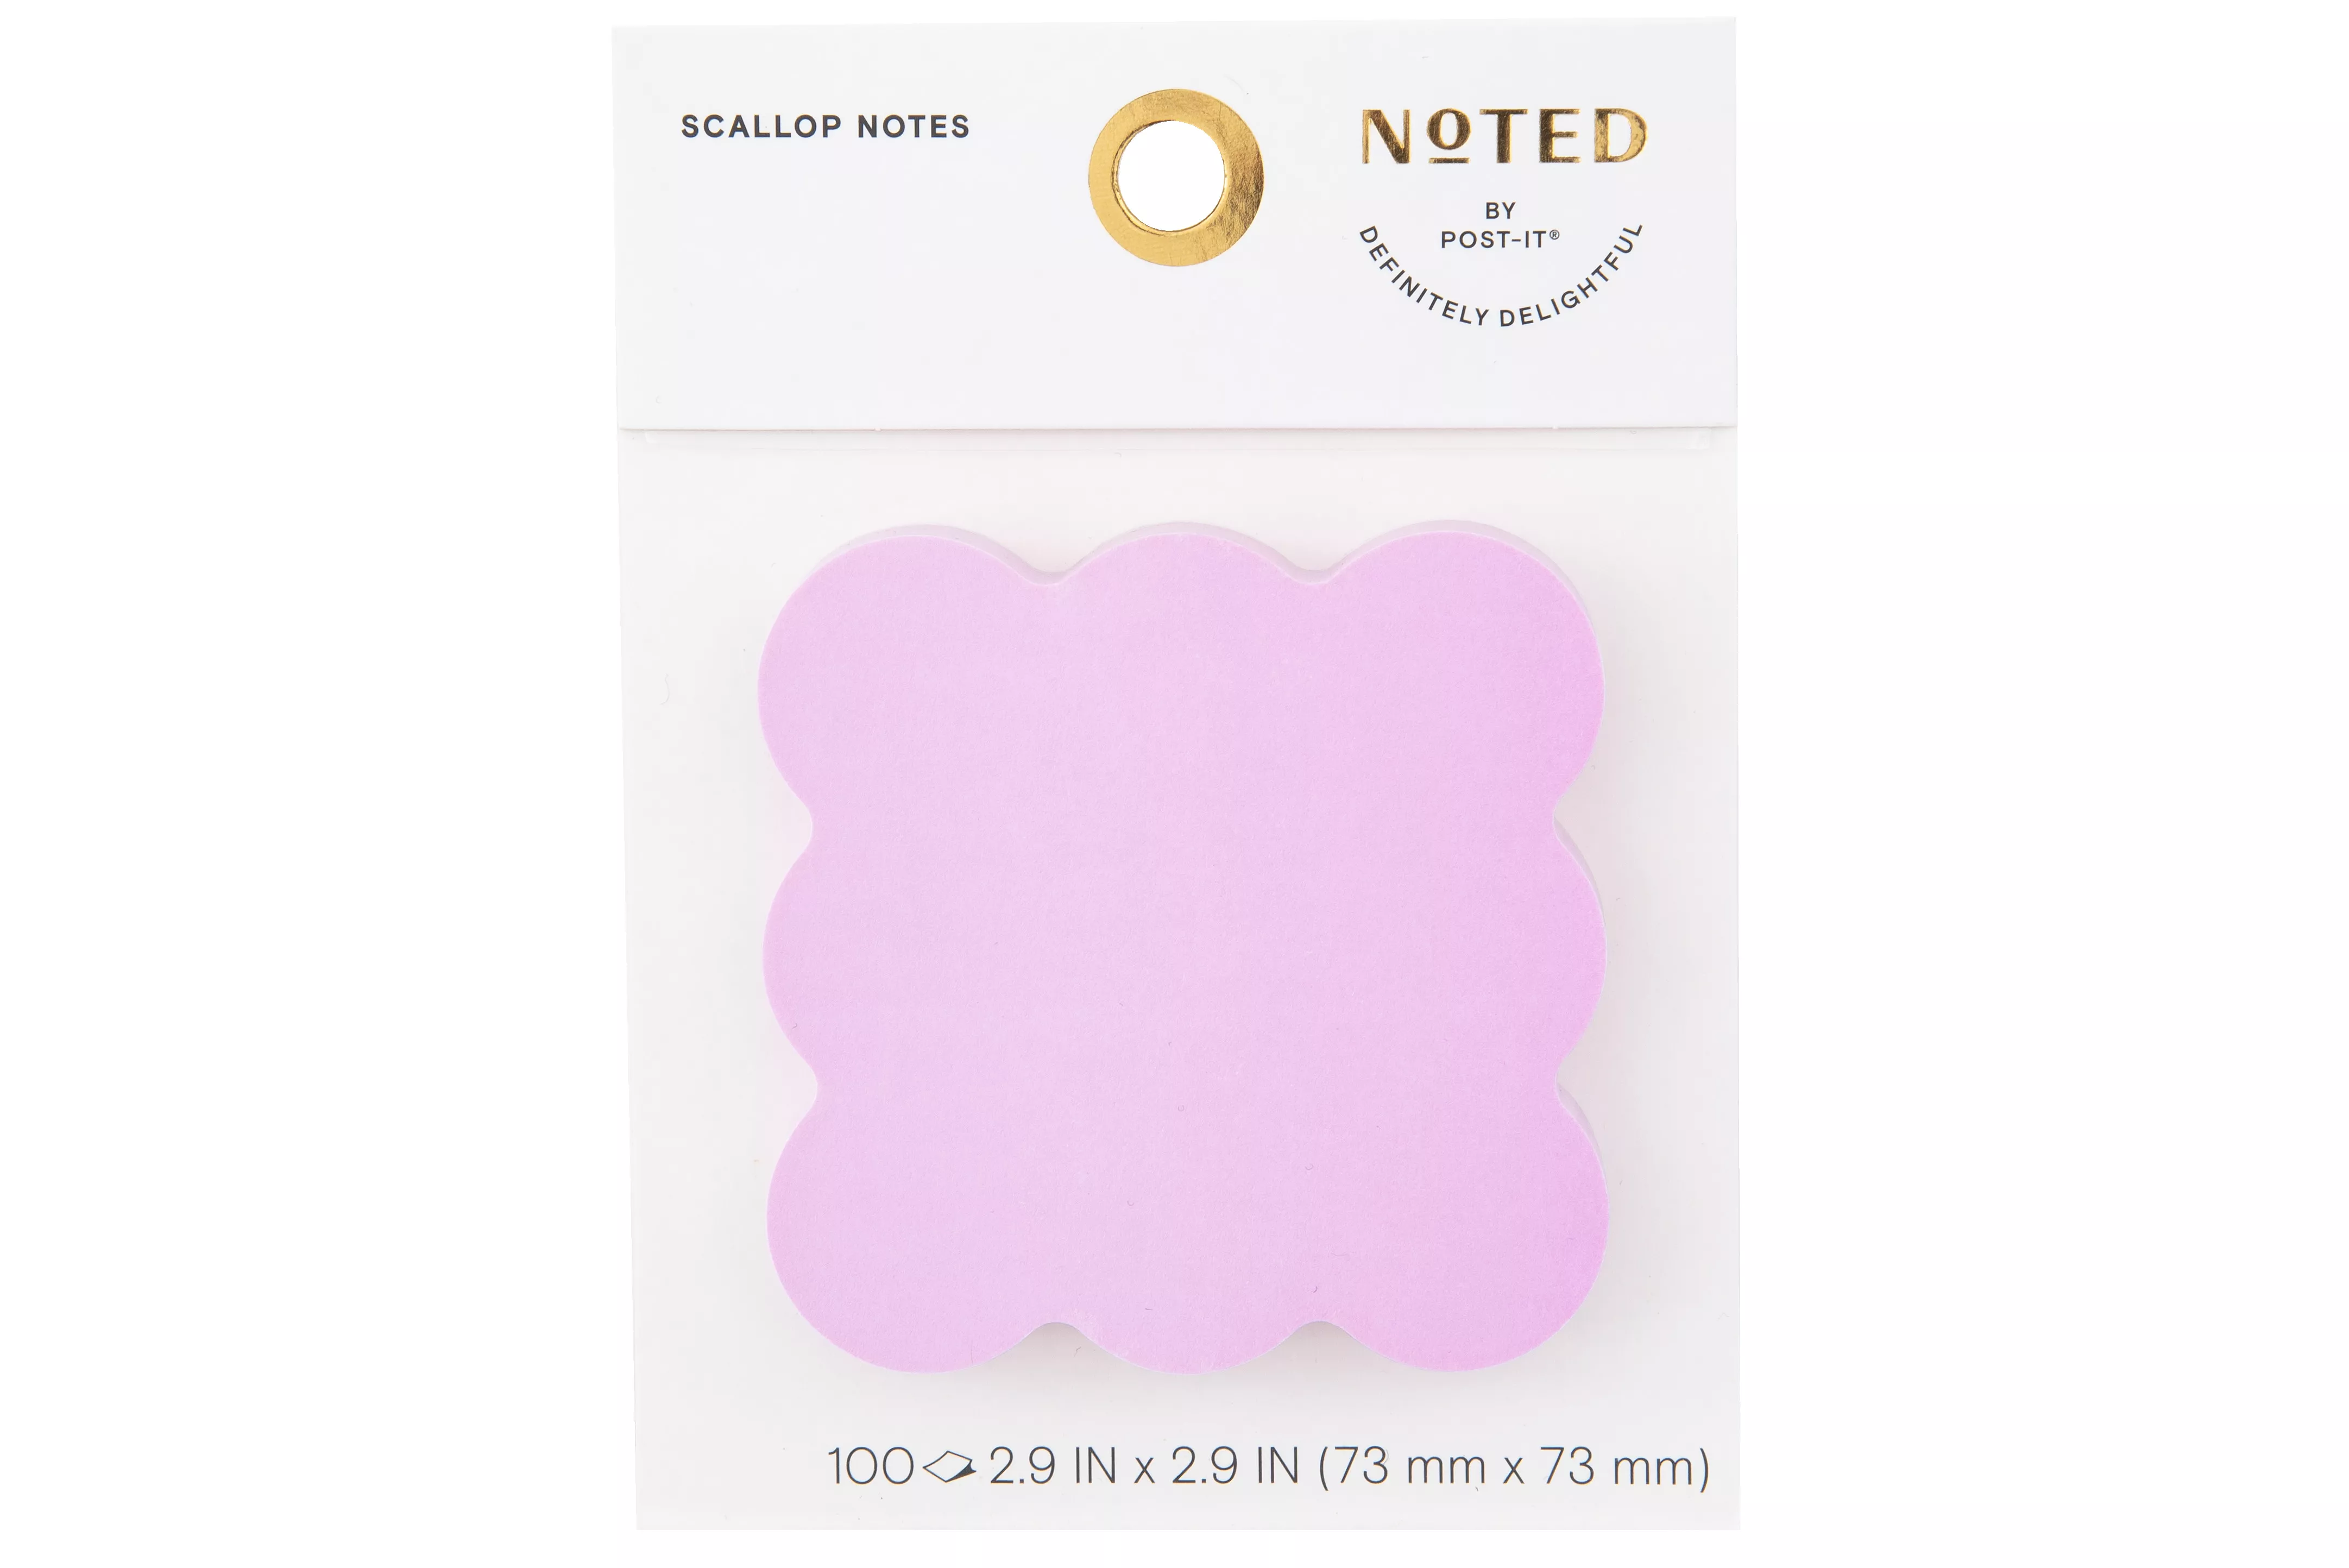 Post-it® Square Scallop Notes NTD8-33-1, 2.9 in x 2.8 in (73 mm x 71 mm)